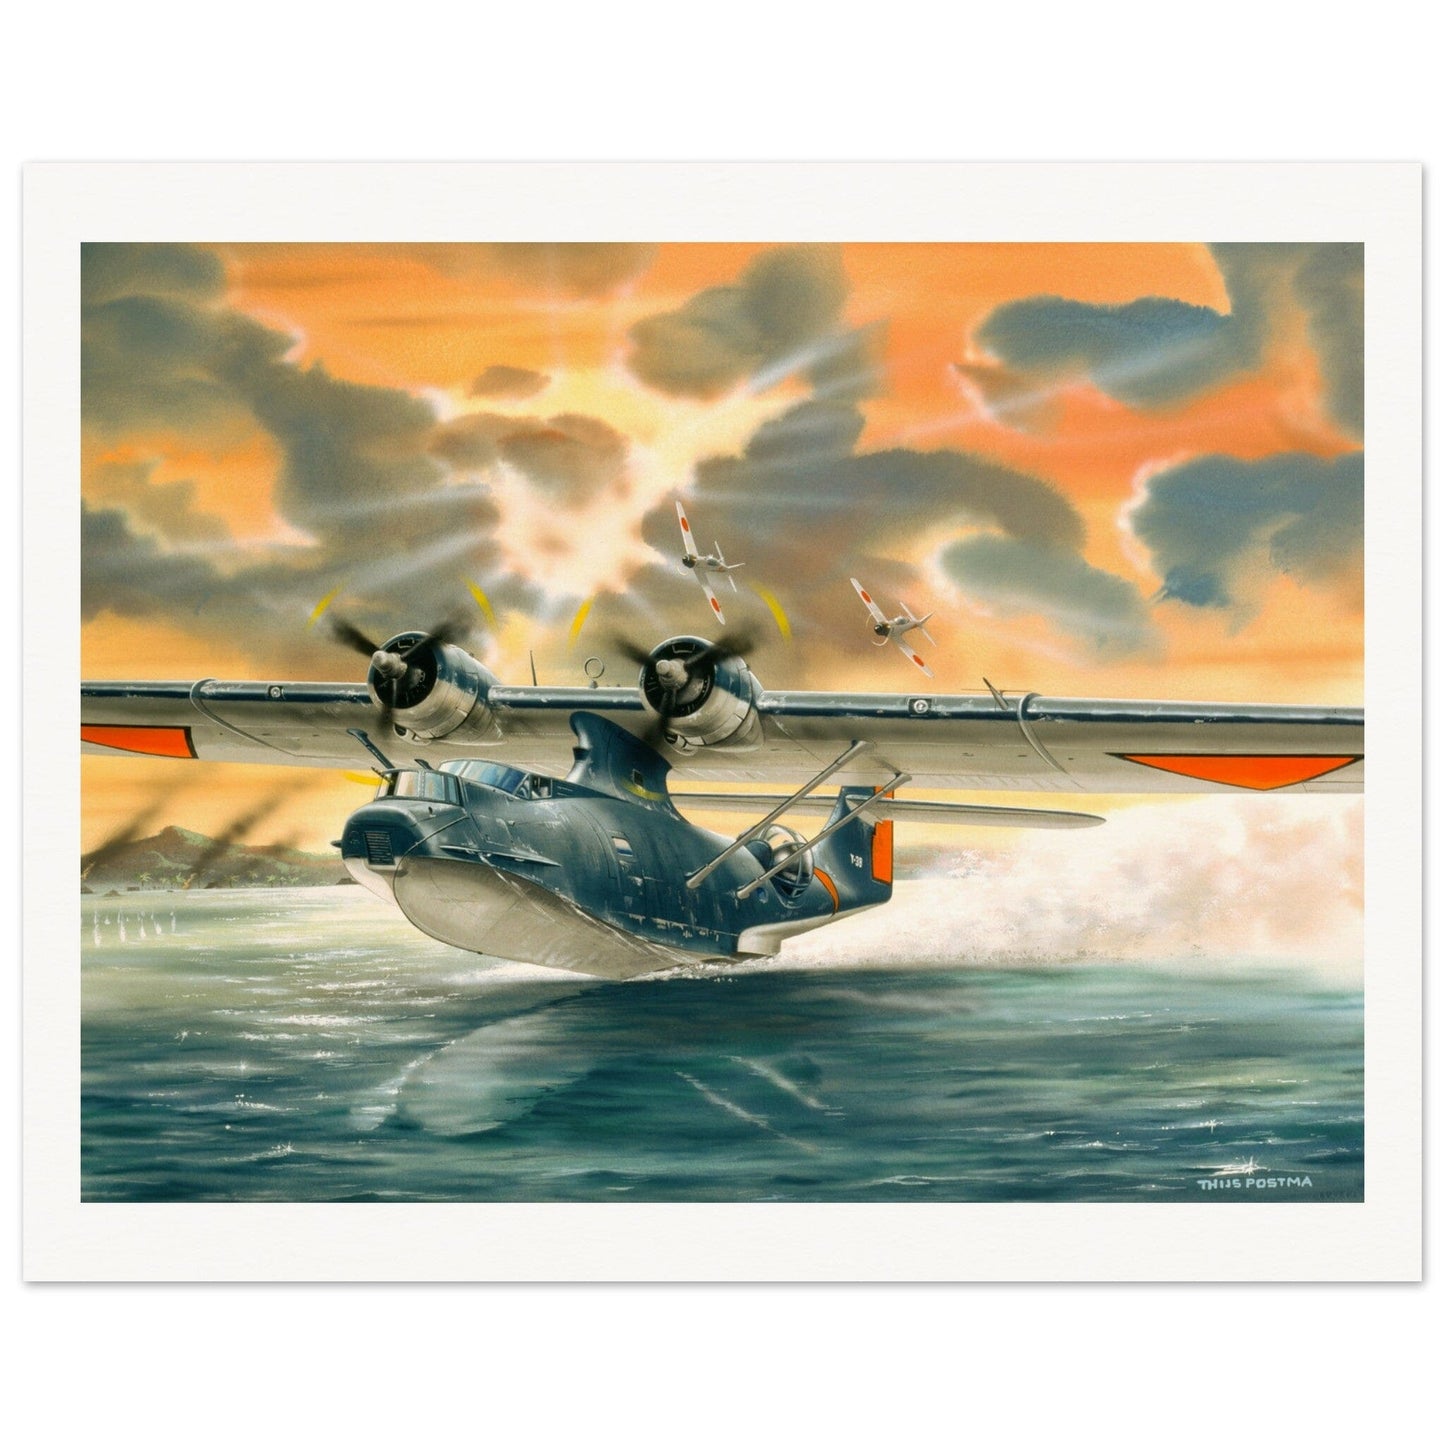 Thijs Postma - Poster - Convair PBY-5 Catalina Attacked By Zeros Poster Only TP Aviation Art 40x50 cm / 16x20″ 